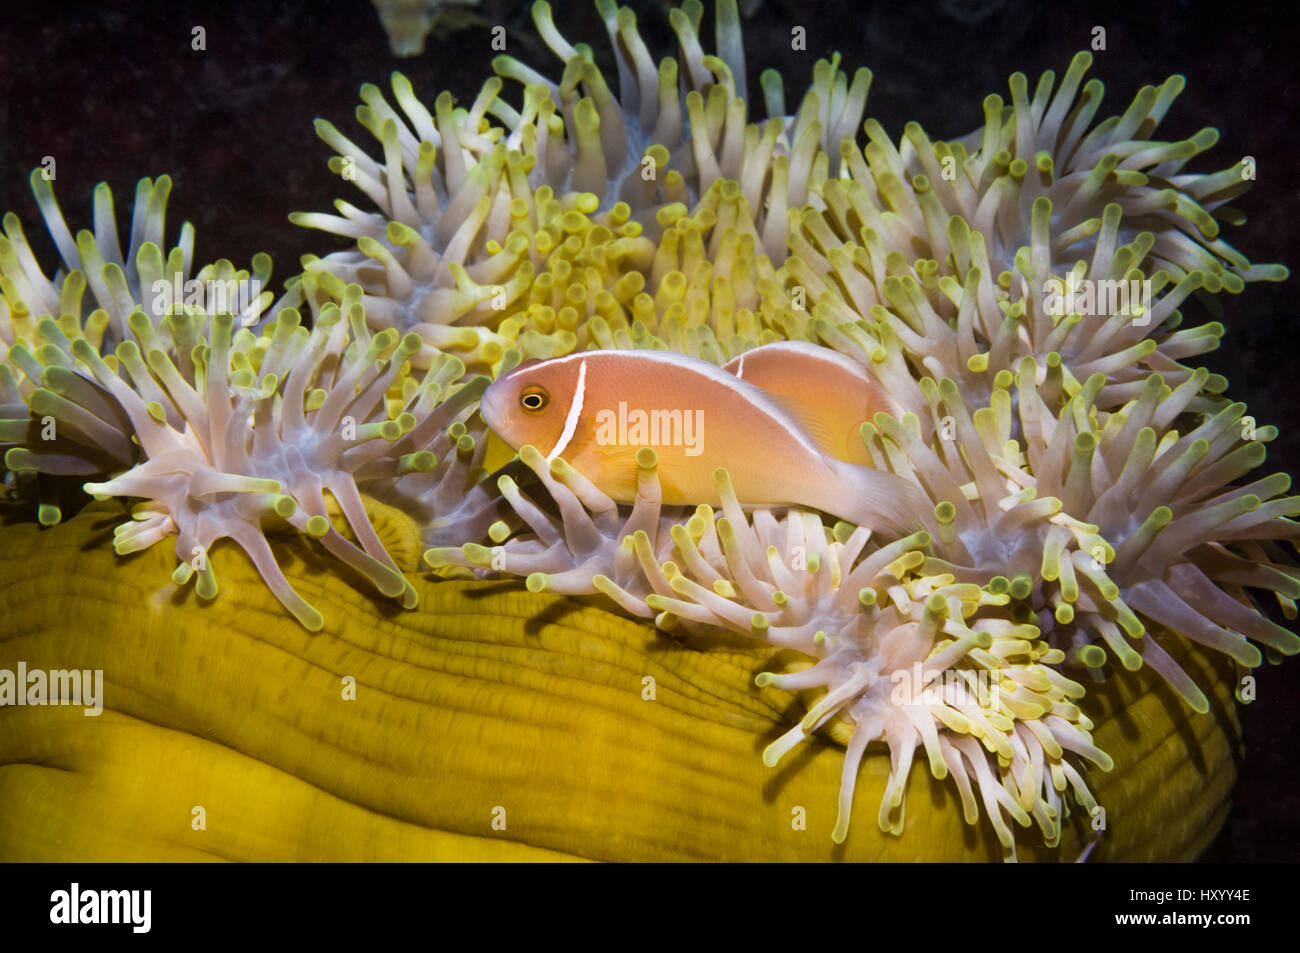 Pink anemonefish (Amphiprion perideraion) with host anemone (Heteractis magnifica). Bunaken National Park, North Sulawesi, Indonesia. Stock Photo